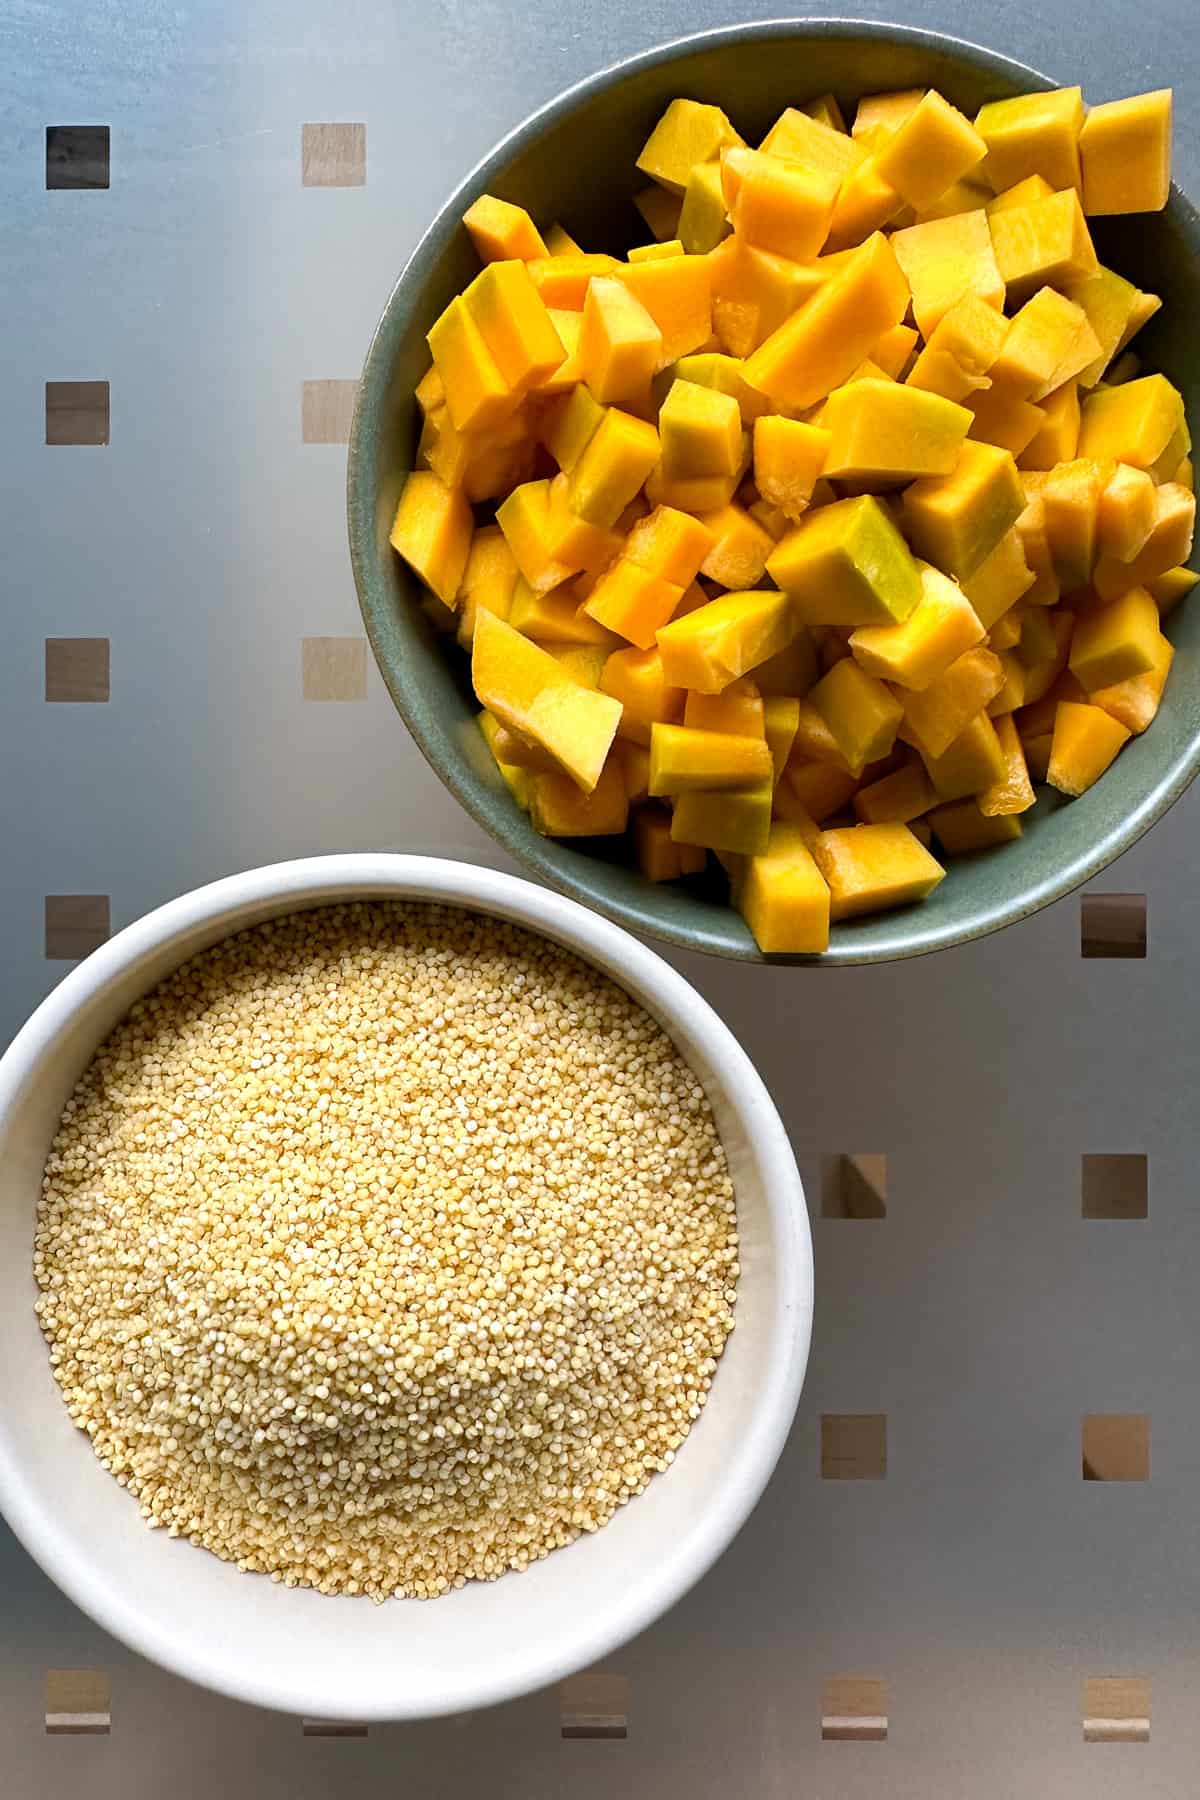 Ingredients for Millet Porridge on a table: a bowl of foxtail millet and a bowl of diced kabocha squash.